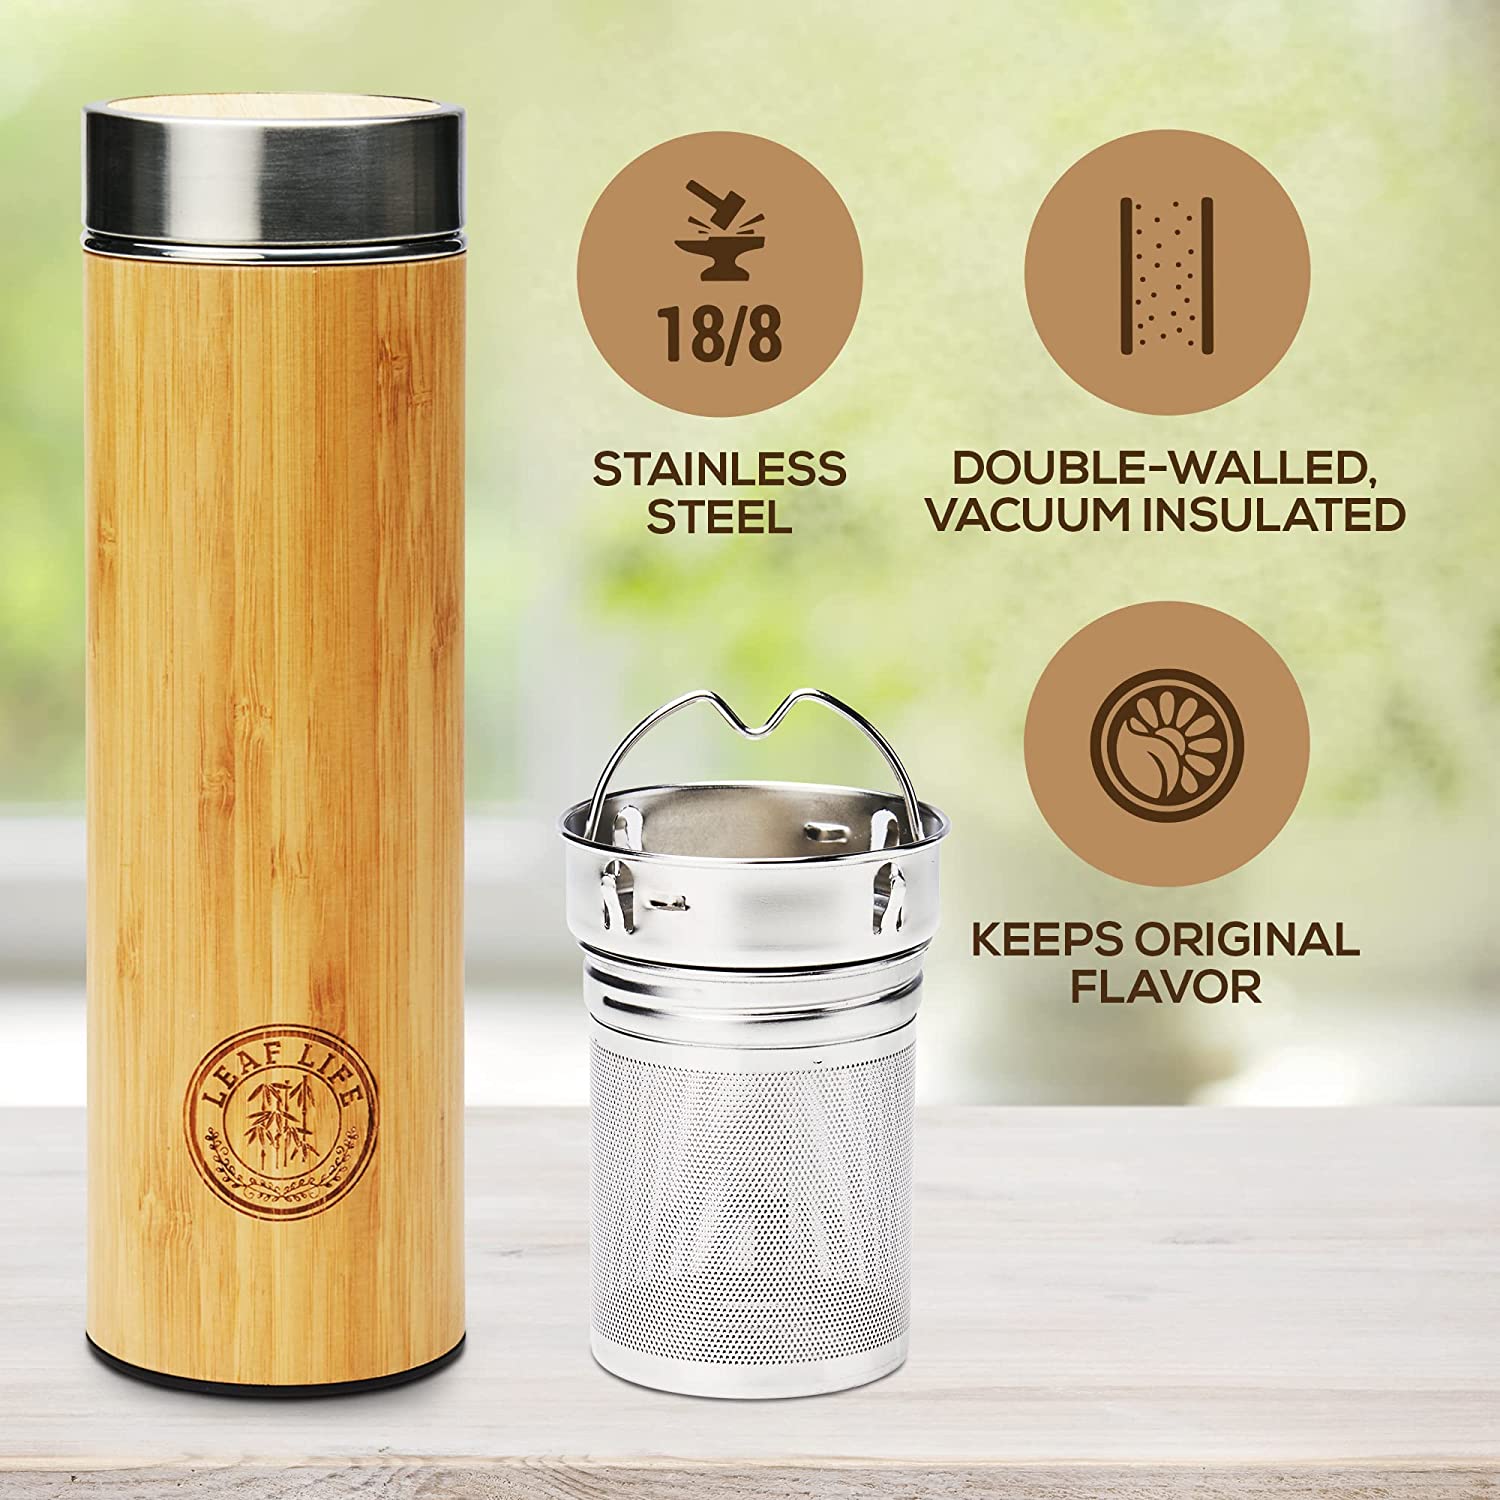 LeafLife Premium Bamboo Thermos with Tea Infuser & Strainer 17oz capacity - Keeps Hot & Cold for 12 Hrs - Vacuum Insulated Stainless Steel Travel Tea Tumbler Infuser Bottle for Loose Leaf Tea & Coffee - image 4 of 9